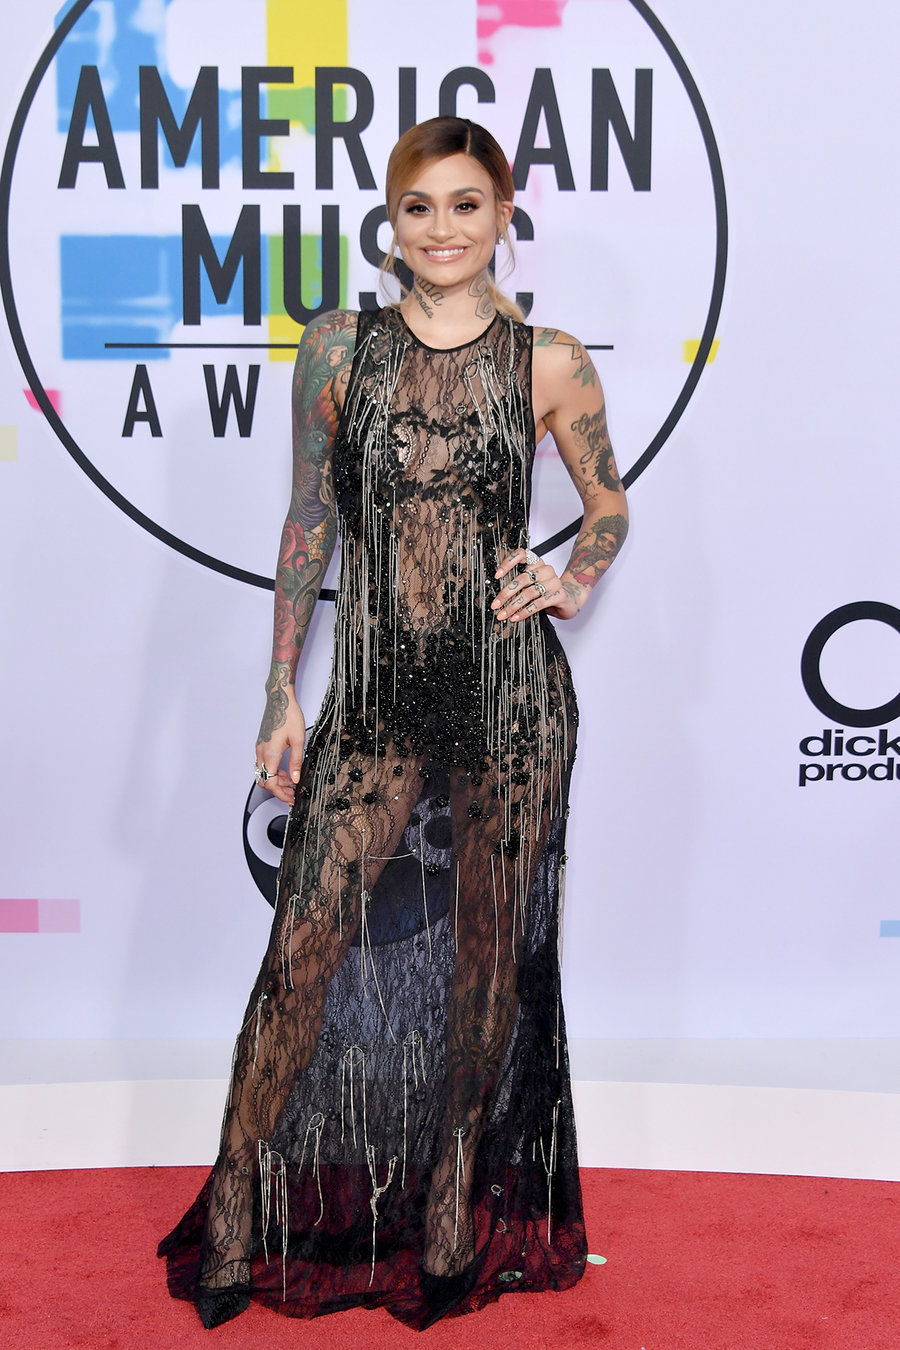 Kehlani. Photo by Neilson Barnard for Getty Images